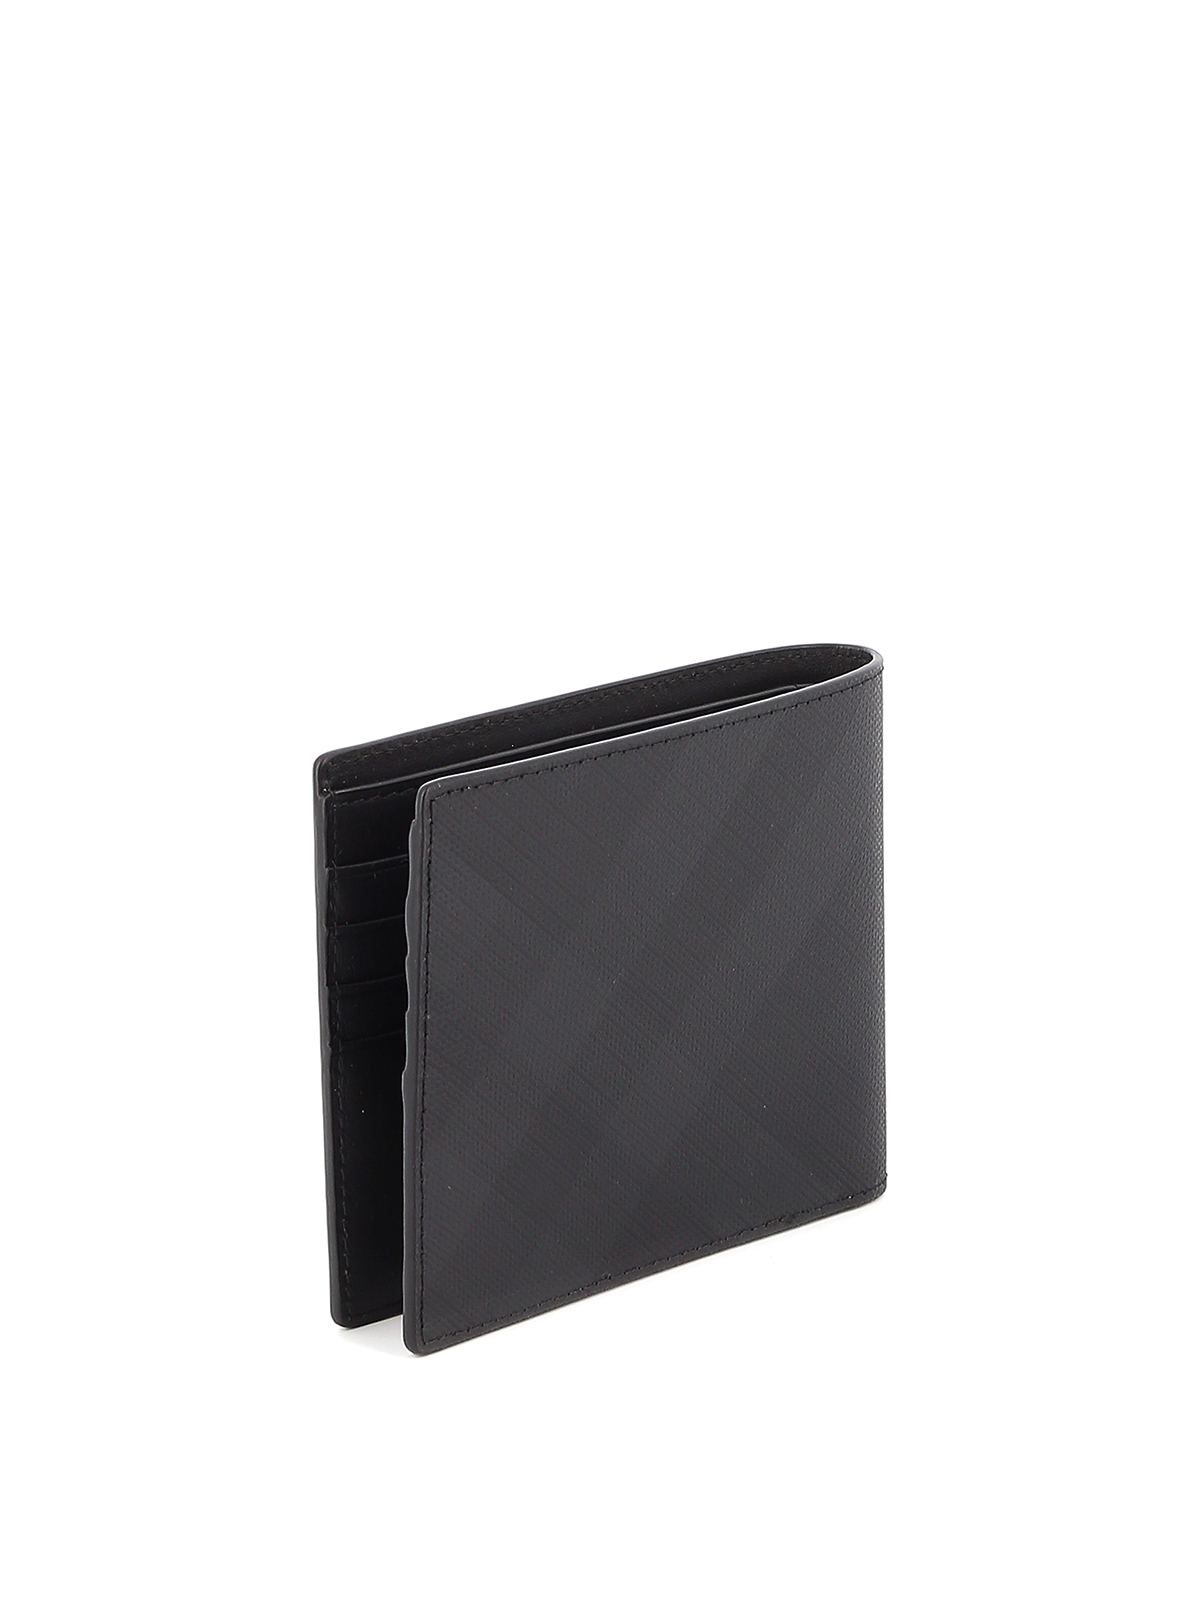 Burberry black Leather Check Bifold Wallet